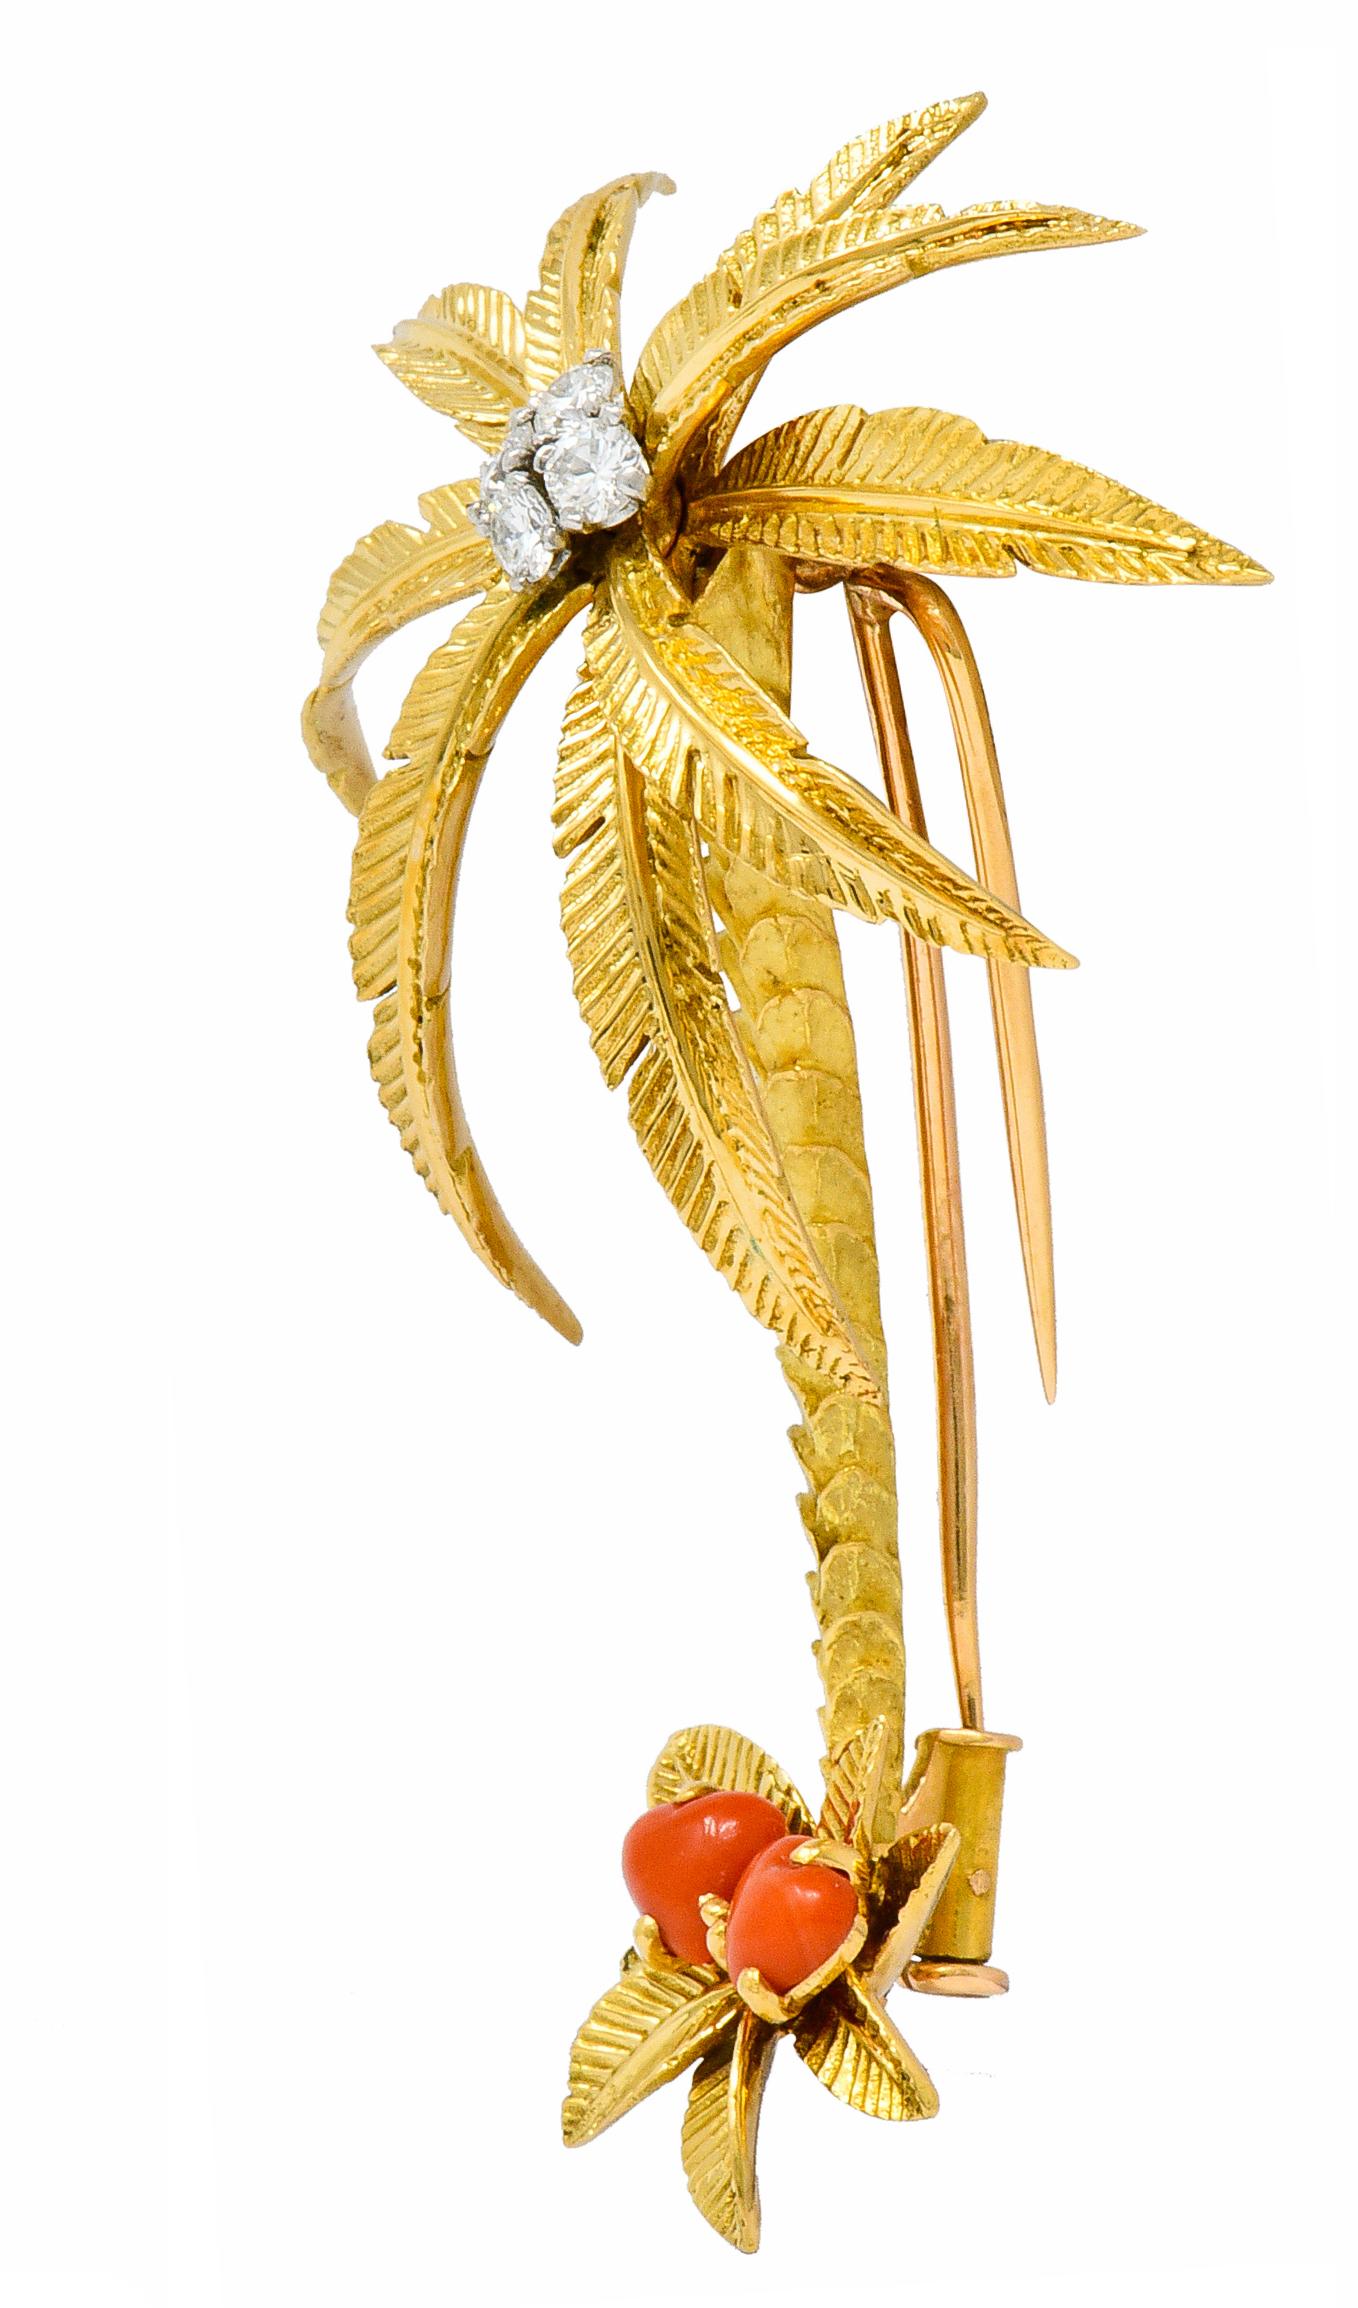 Brooch is designed as a palm tree with layered and radiating leaves

Bark of trunk is matte gold with dynamically tiered texture while leaves are brightly polished and engraved

Top of tree features a cluster of round brilliant cut diamonds weighing